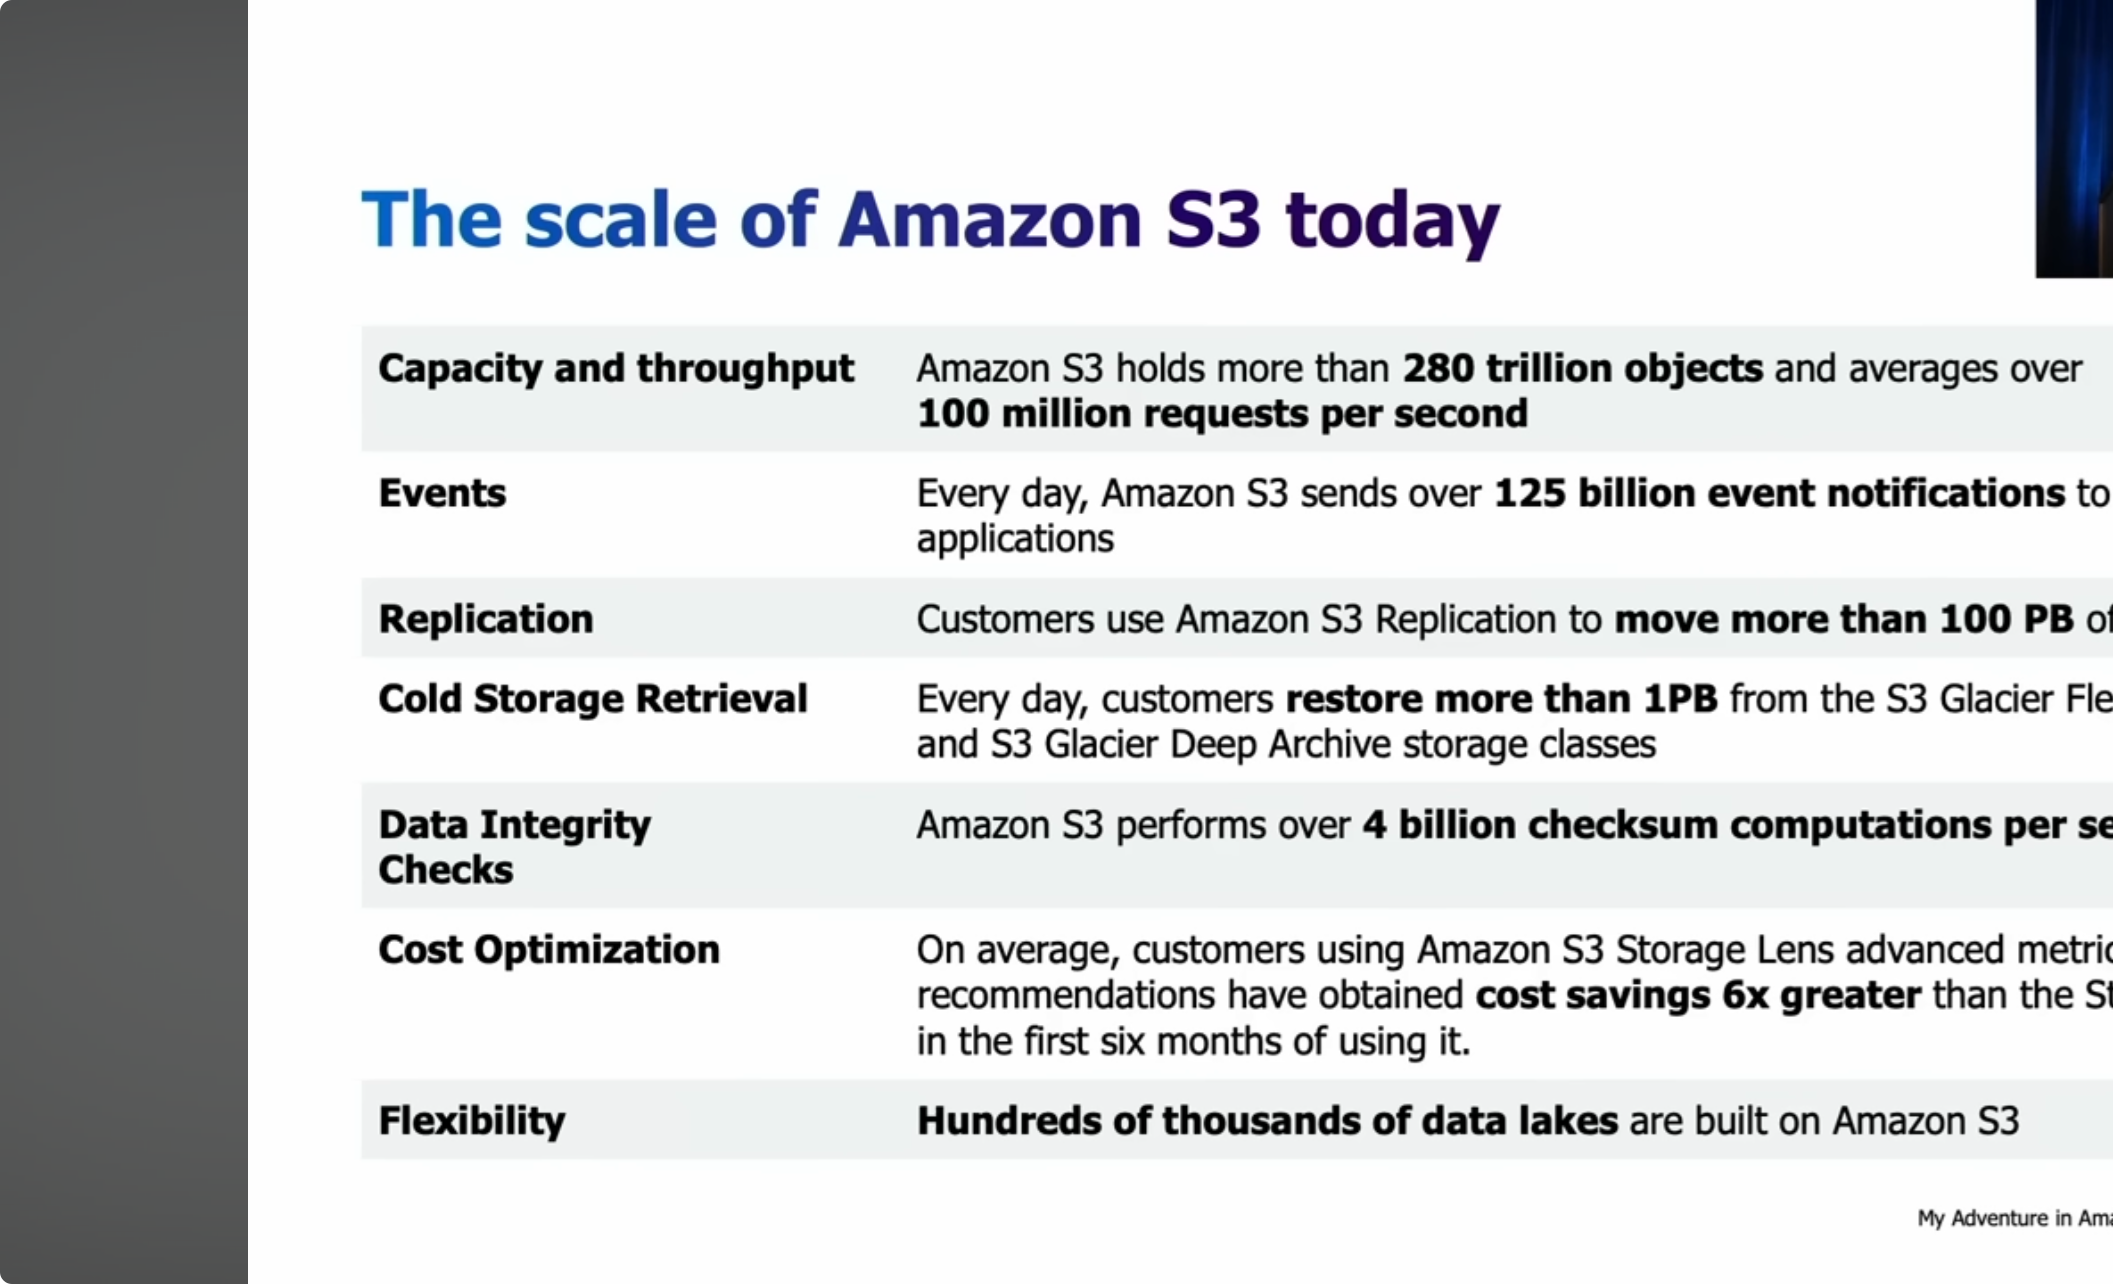 The scale of Amazon S3 today